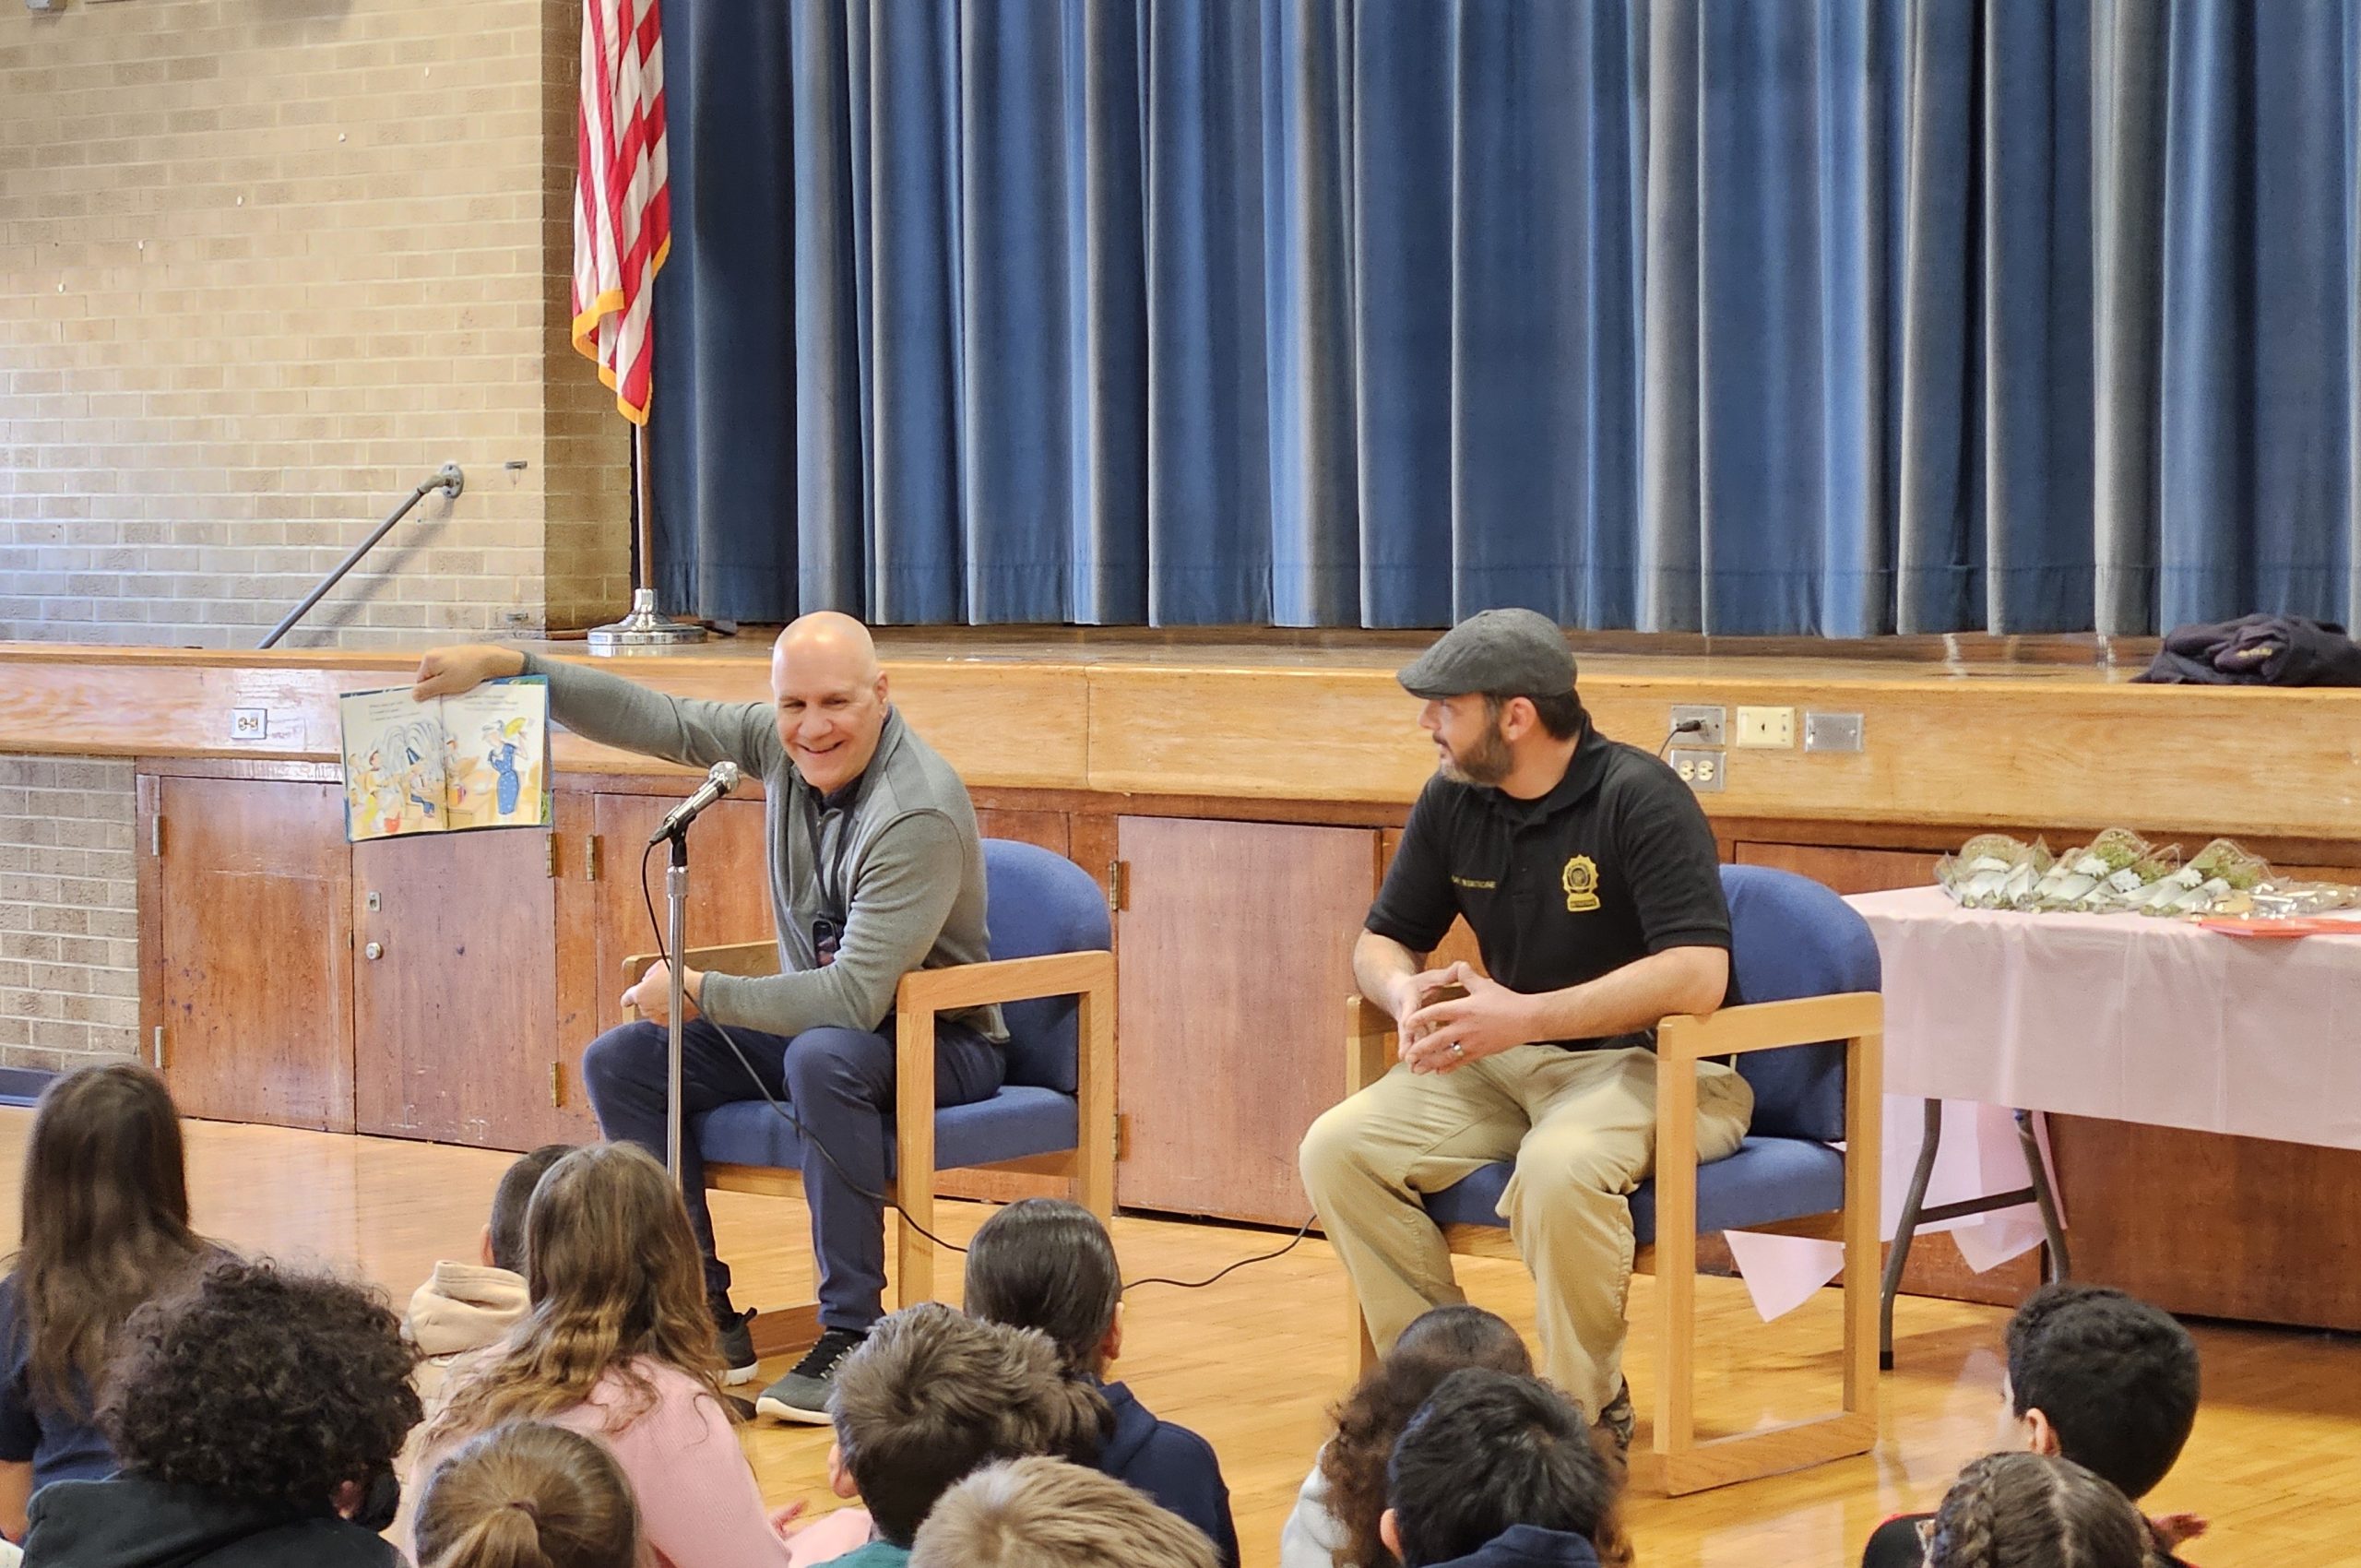 Read Across America Day at Hehnly Elementary School